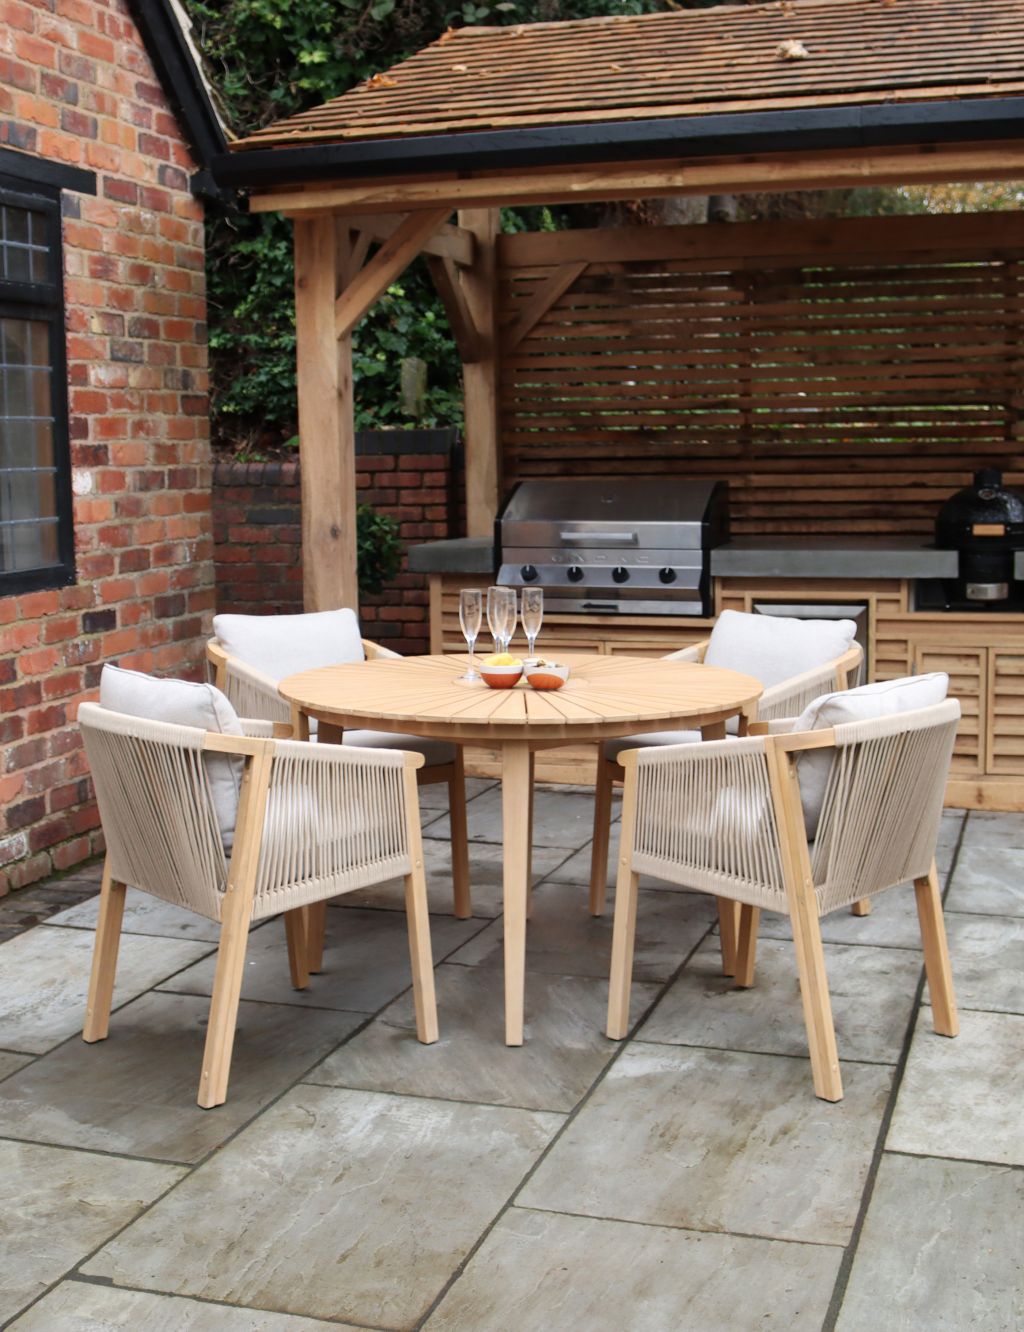 Roma 4 Seater Garden Table & Chairs 1 of 4